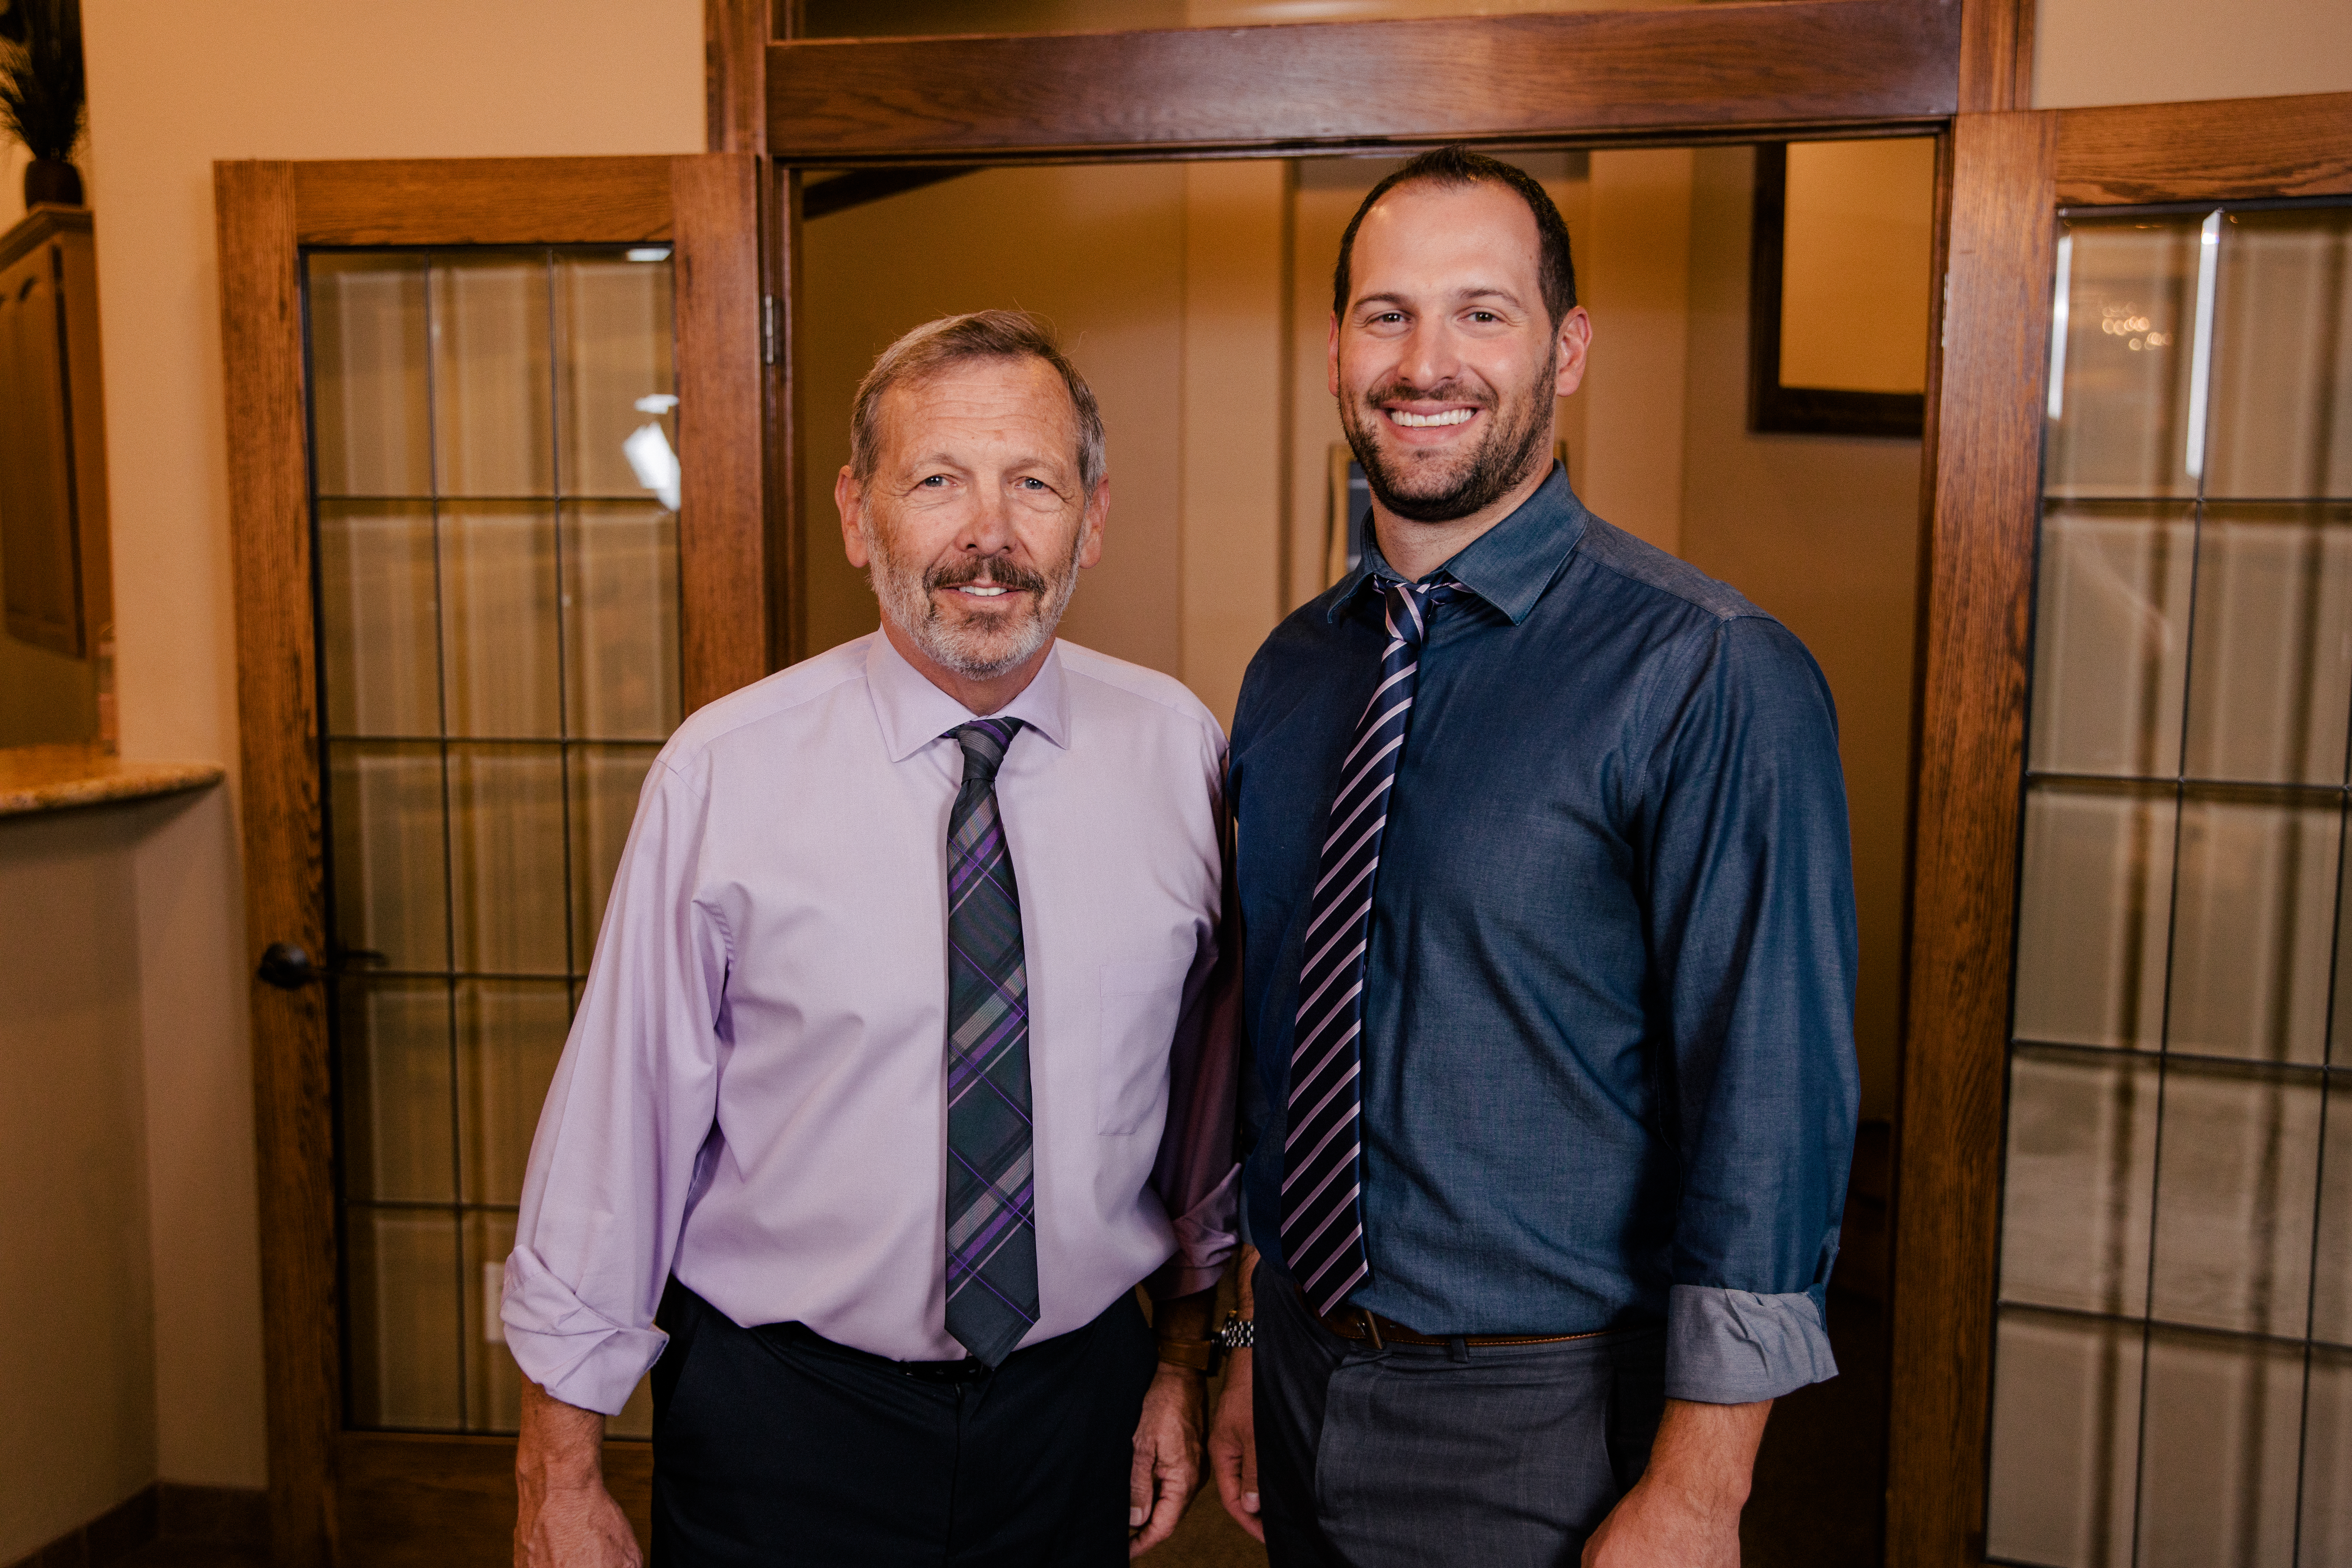 Dr. Aaron and Paul Wulff of Distinctive Dental Care